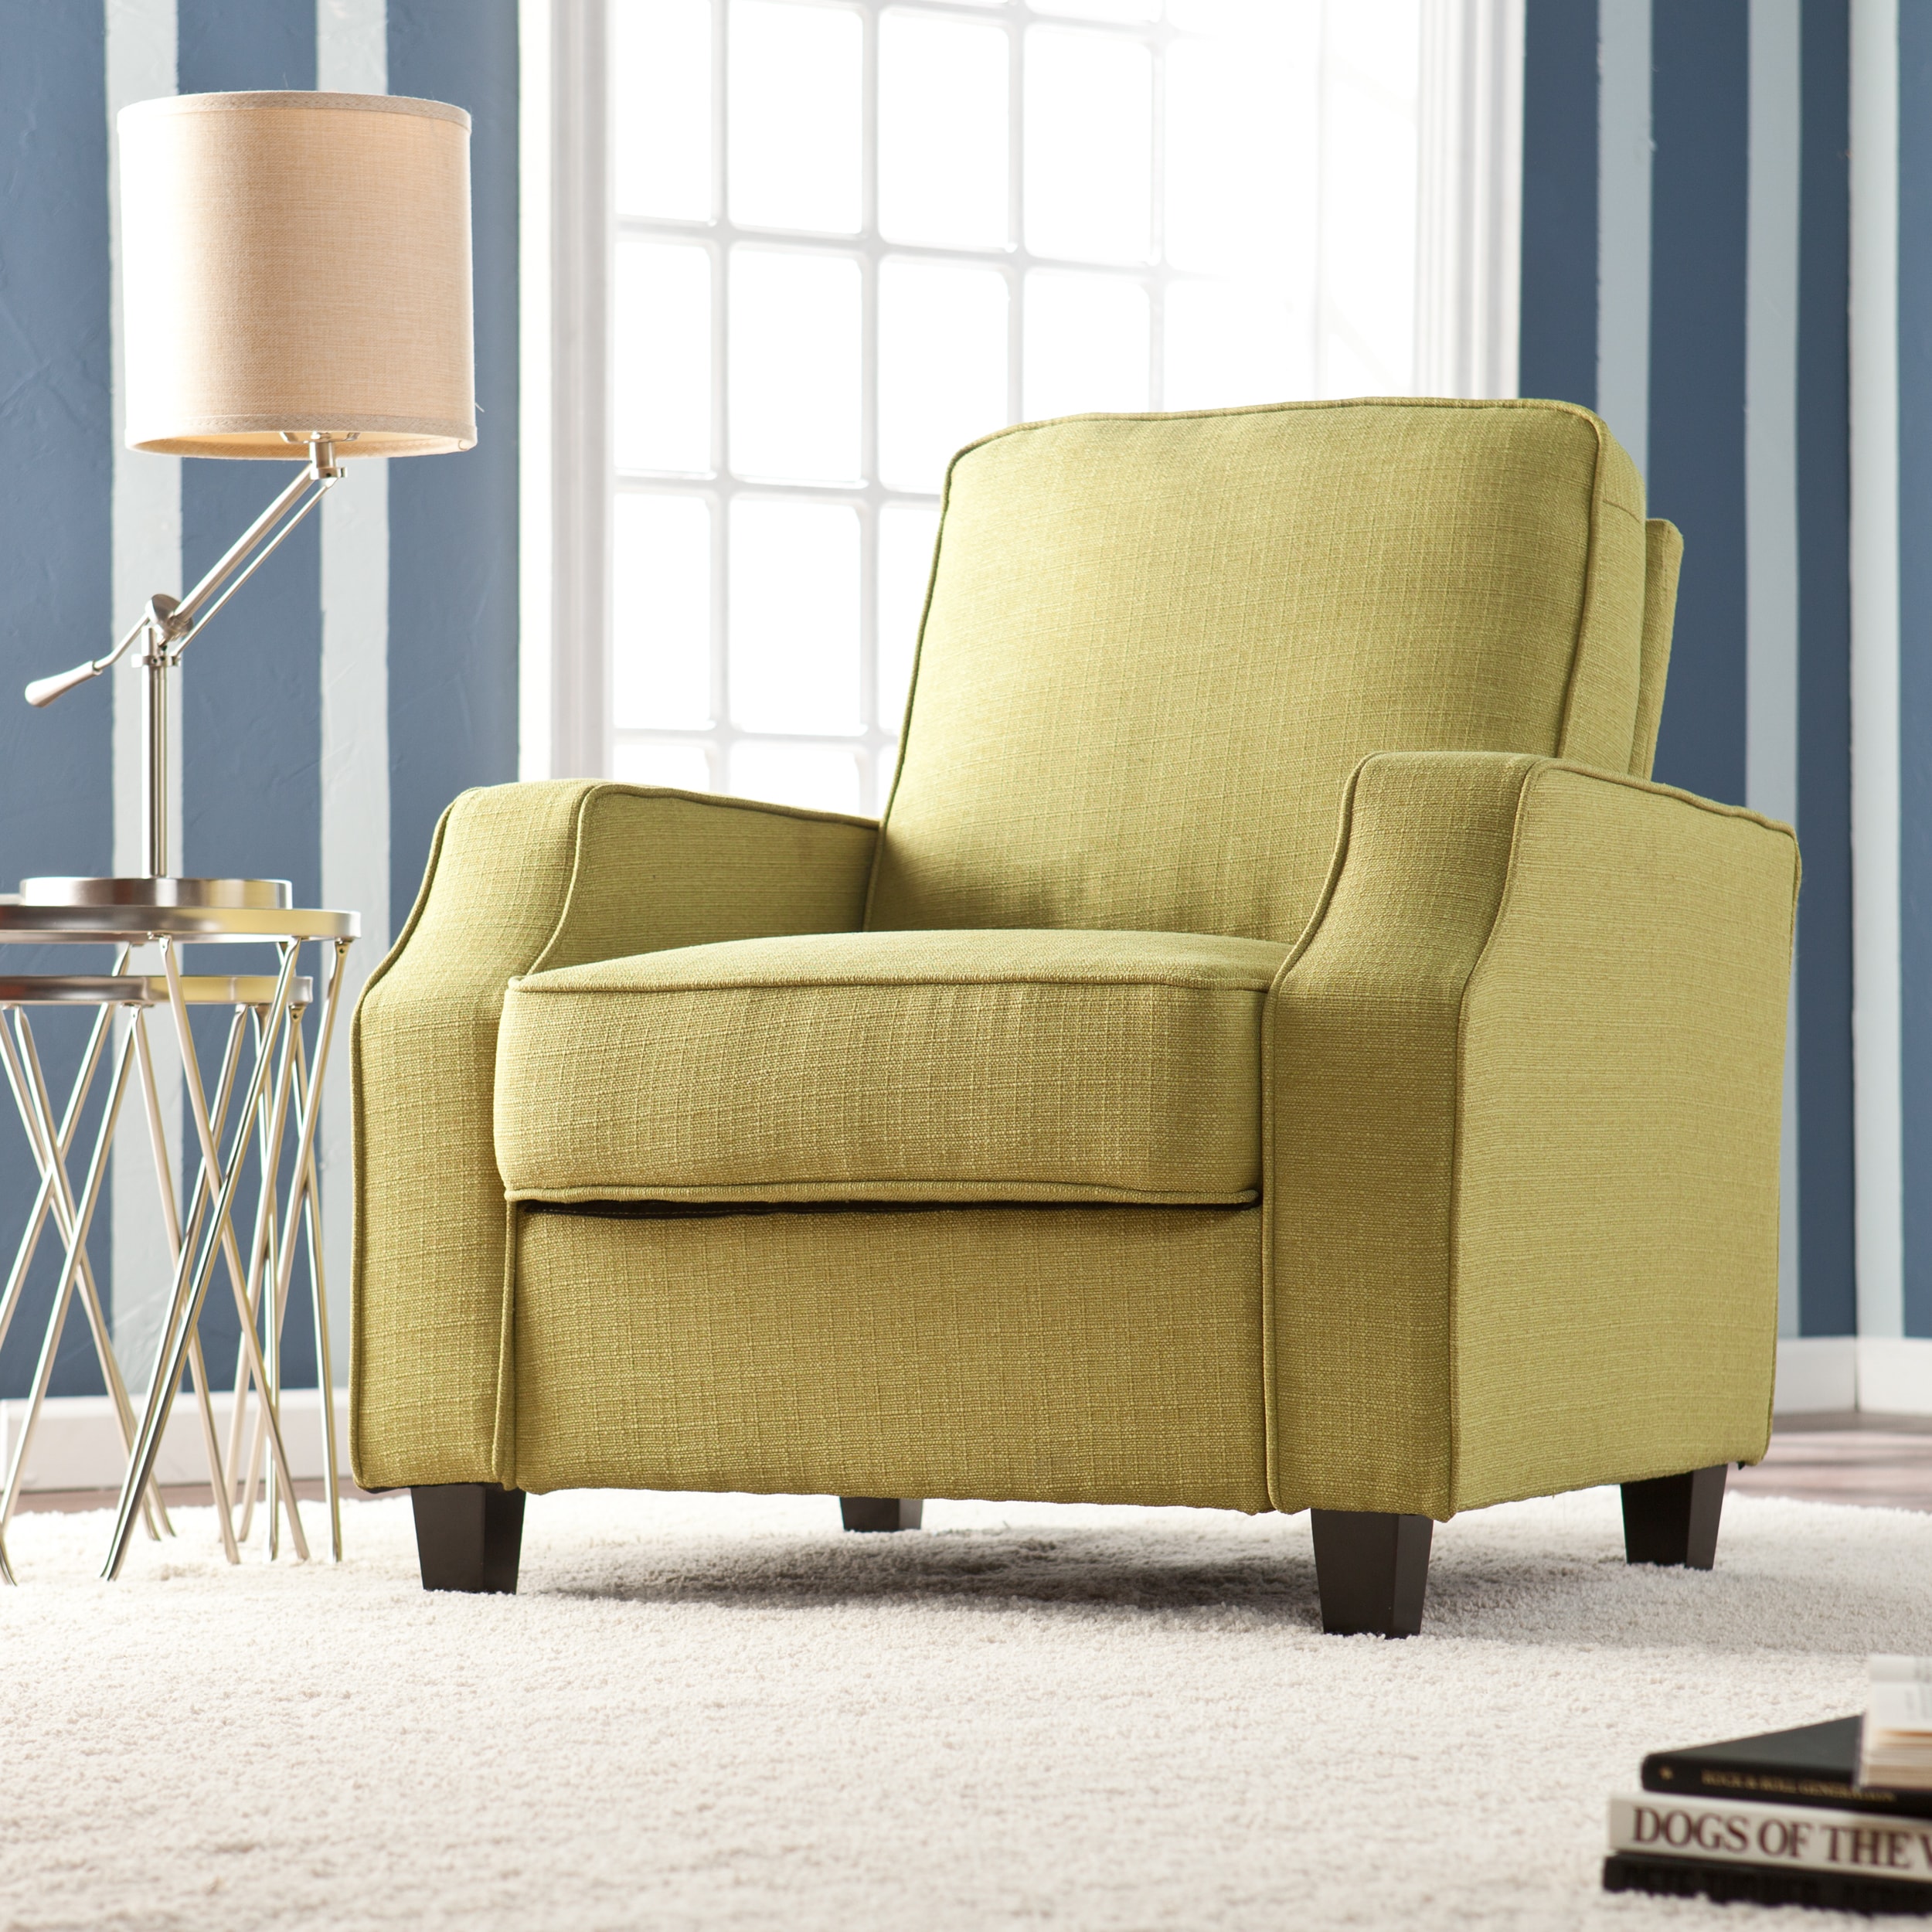 Upton Home Corey Apple Green Upholstered Arm Chair